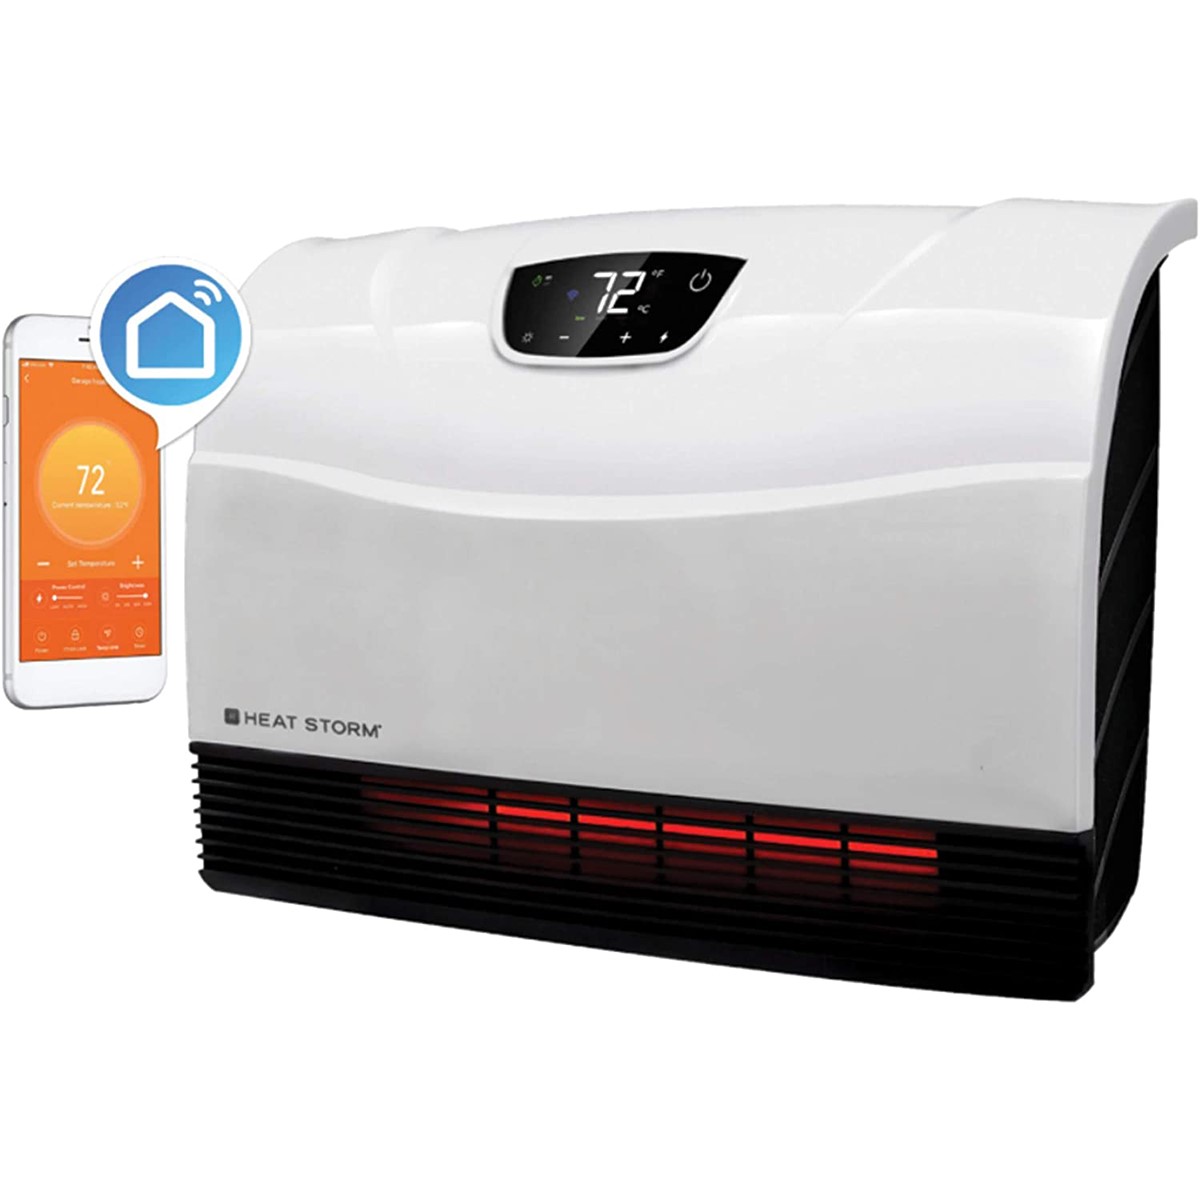 Heat Storm Phoenix 1500W WiFi Infrared Space Heater, Indoor, White, HS-1500-PHX-WIFI - image 1 of 7